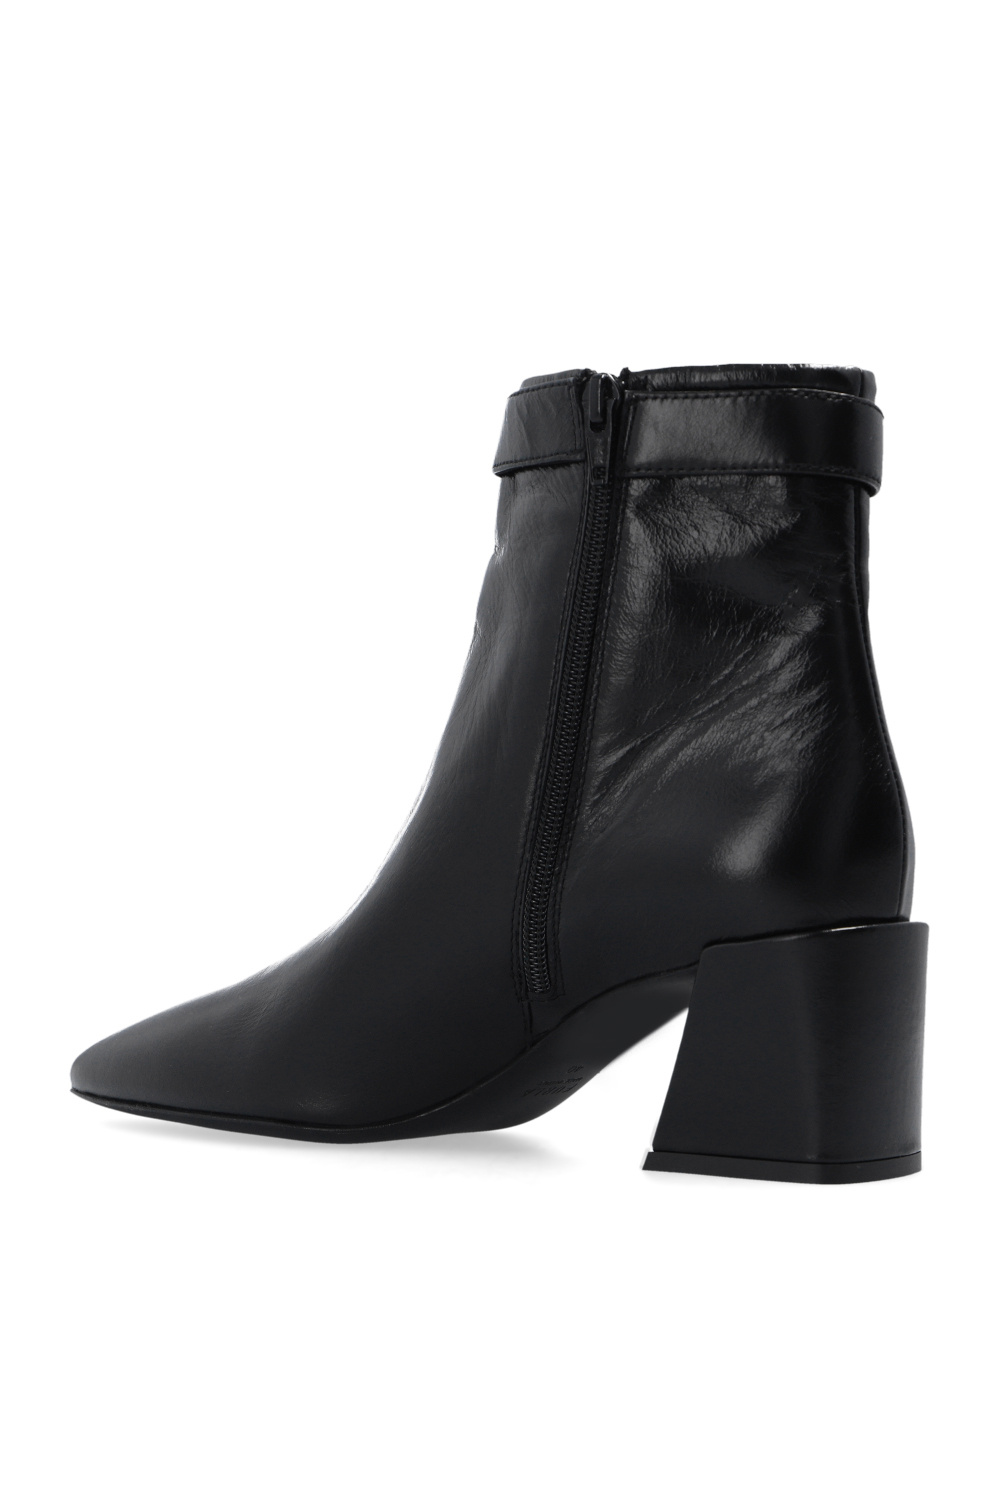 Furla ‘Chain’ heeled ankle boots